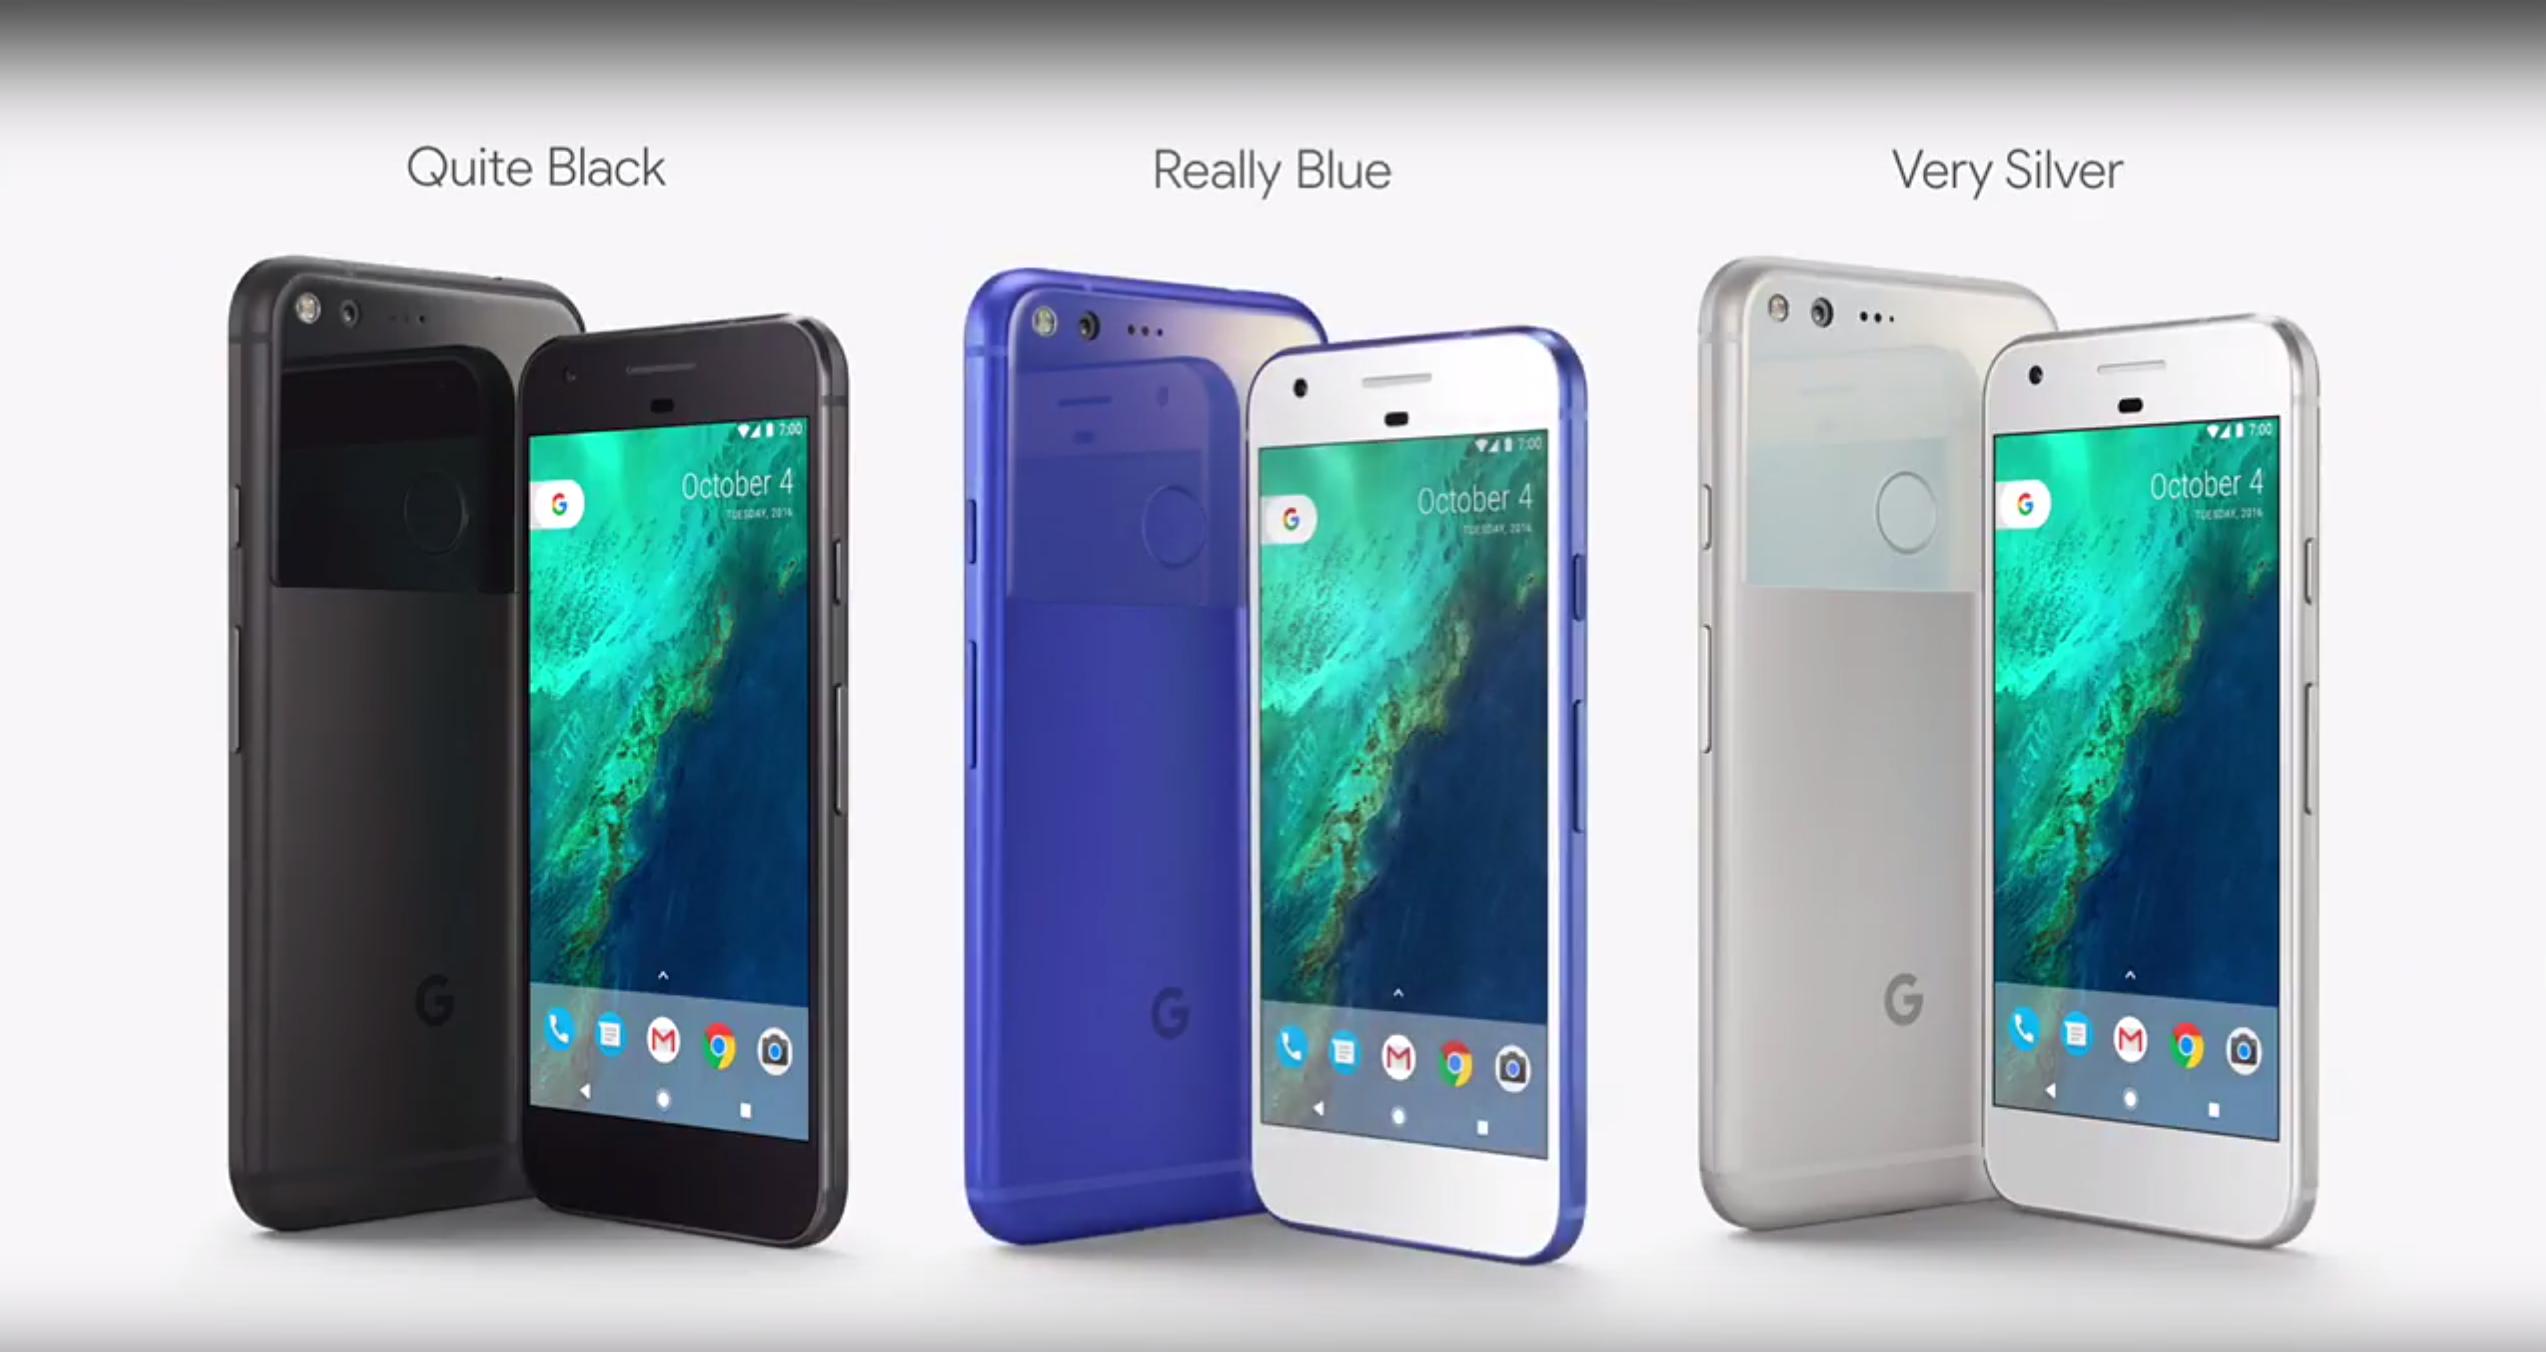 google pixel mocks iphone with quite black very silver and really blue colours image 1